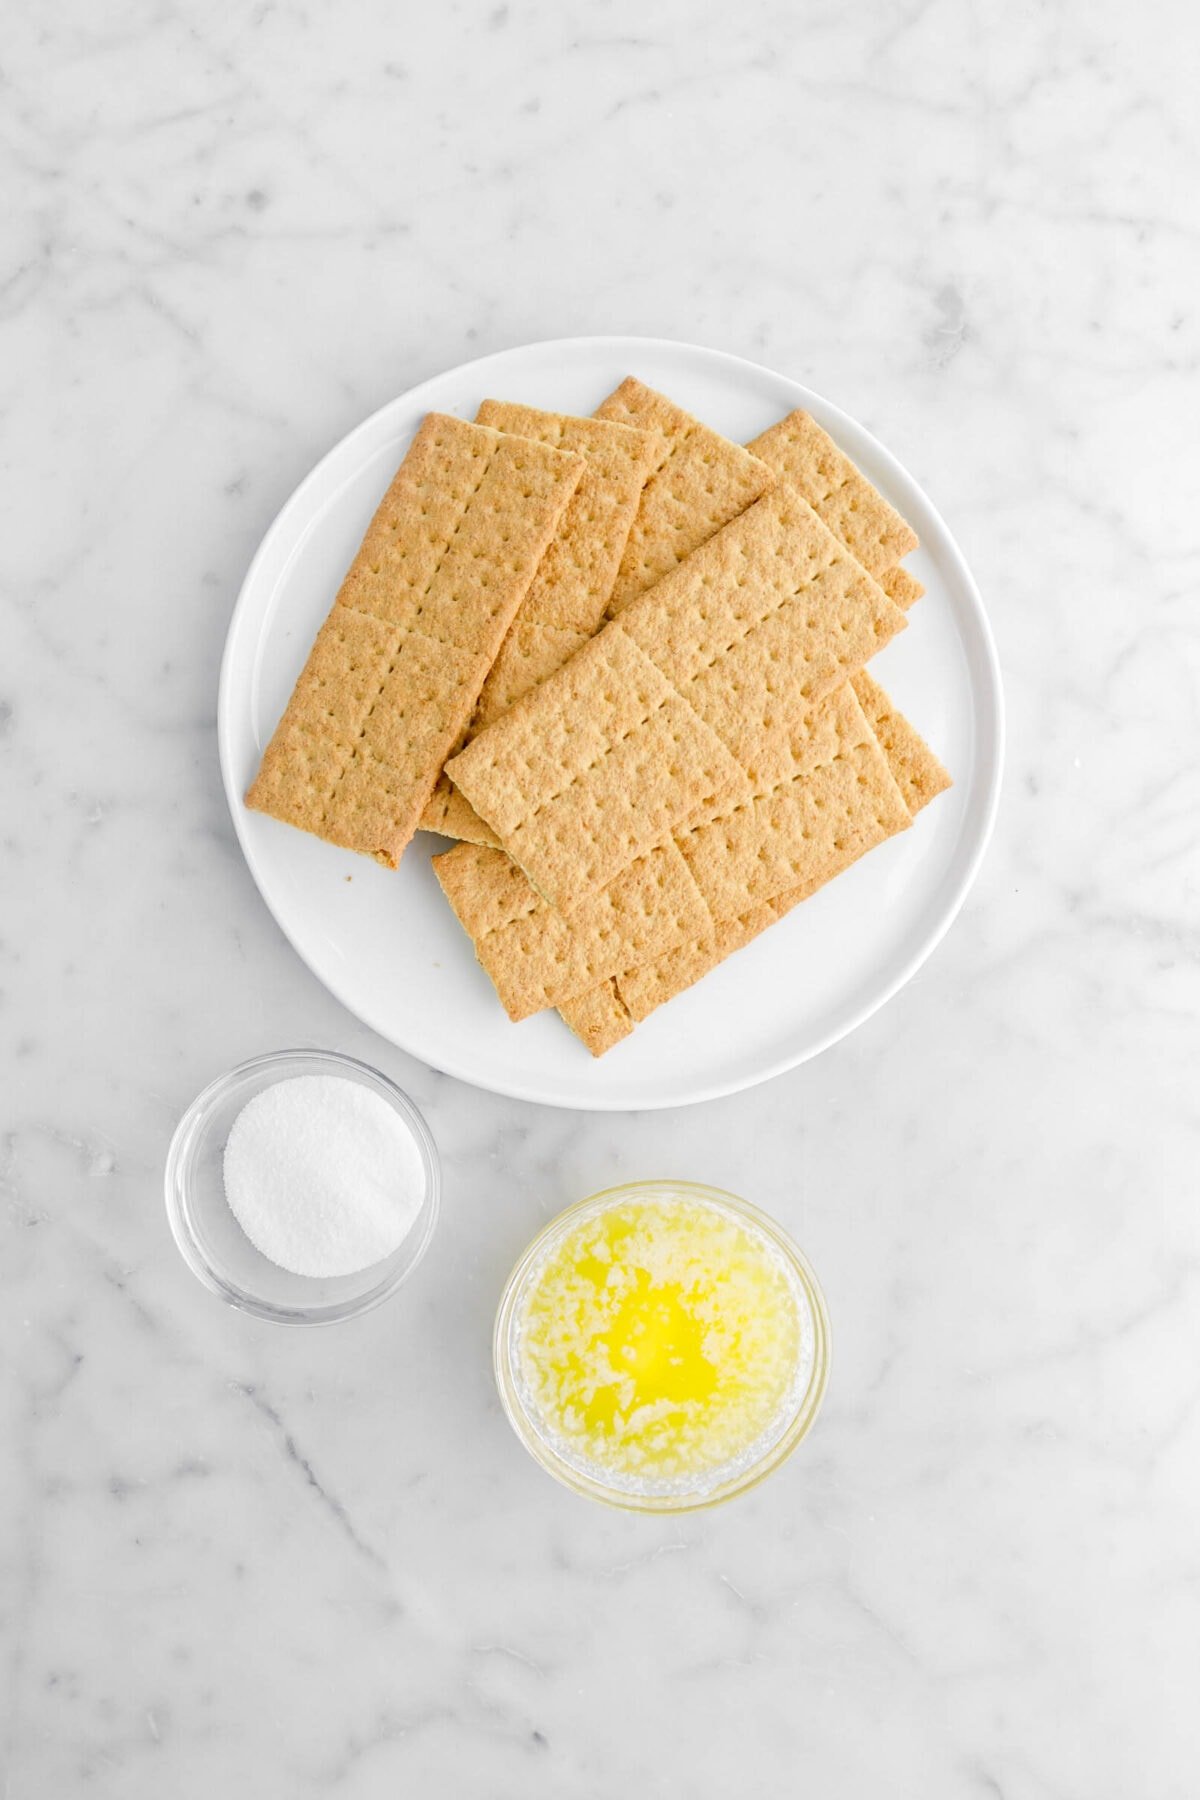 graham crackers, sugar, and melted butter on marble surface.